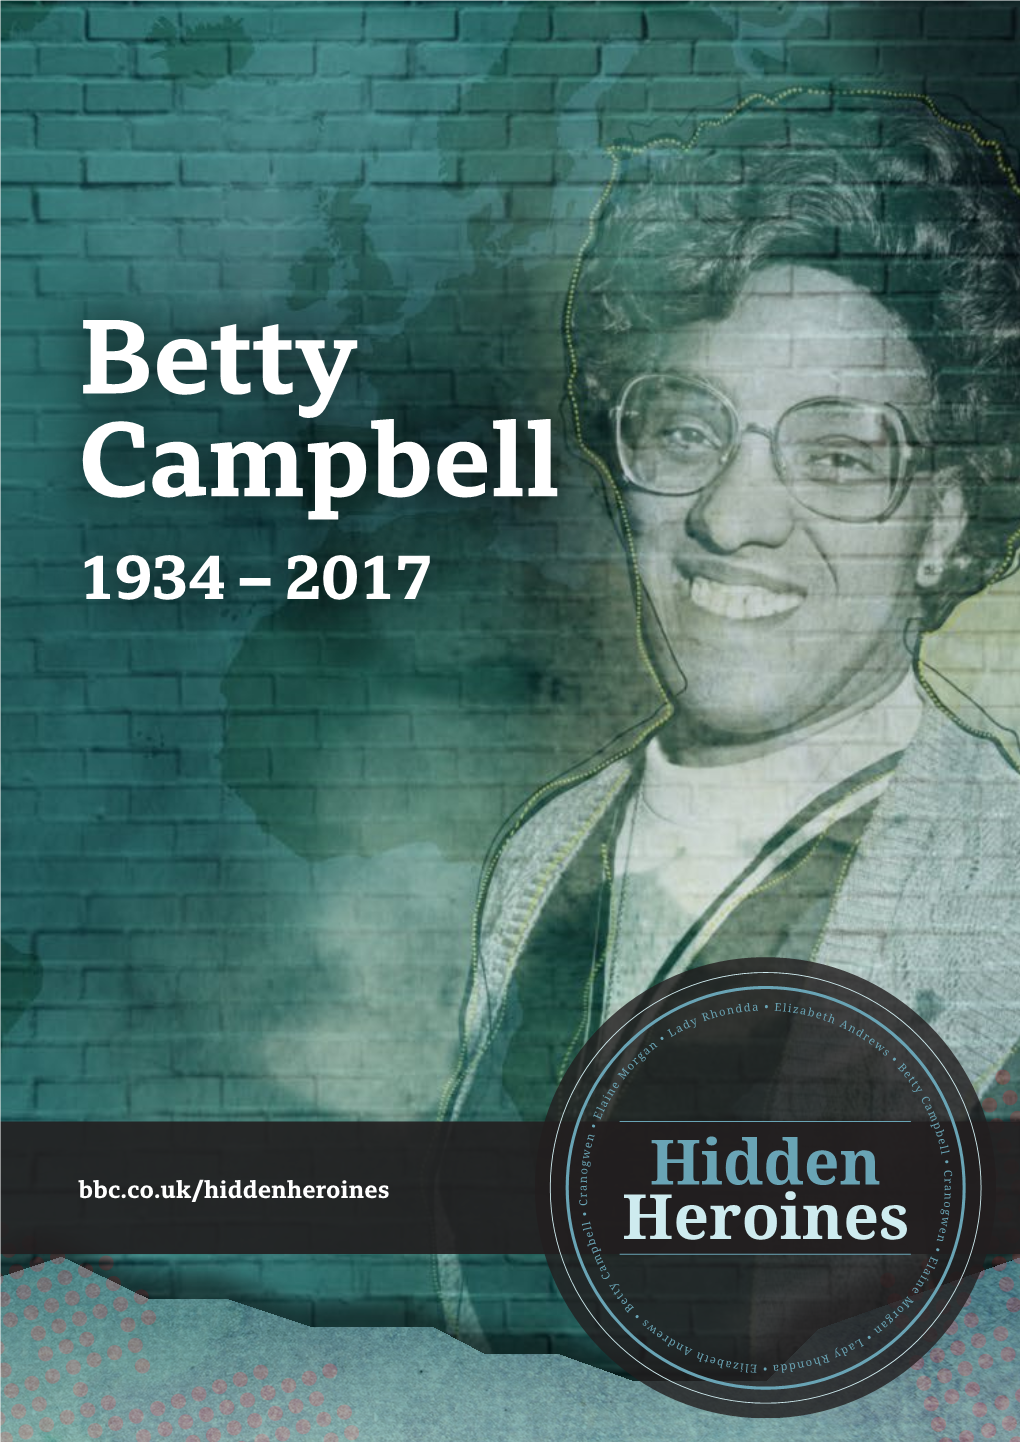 Betty Campbell 1934 – 2017